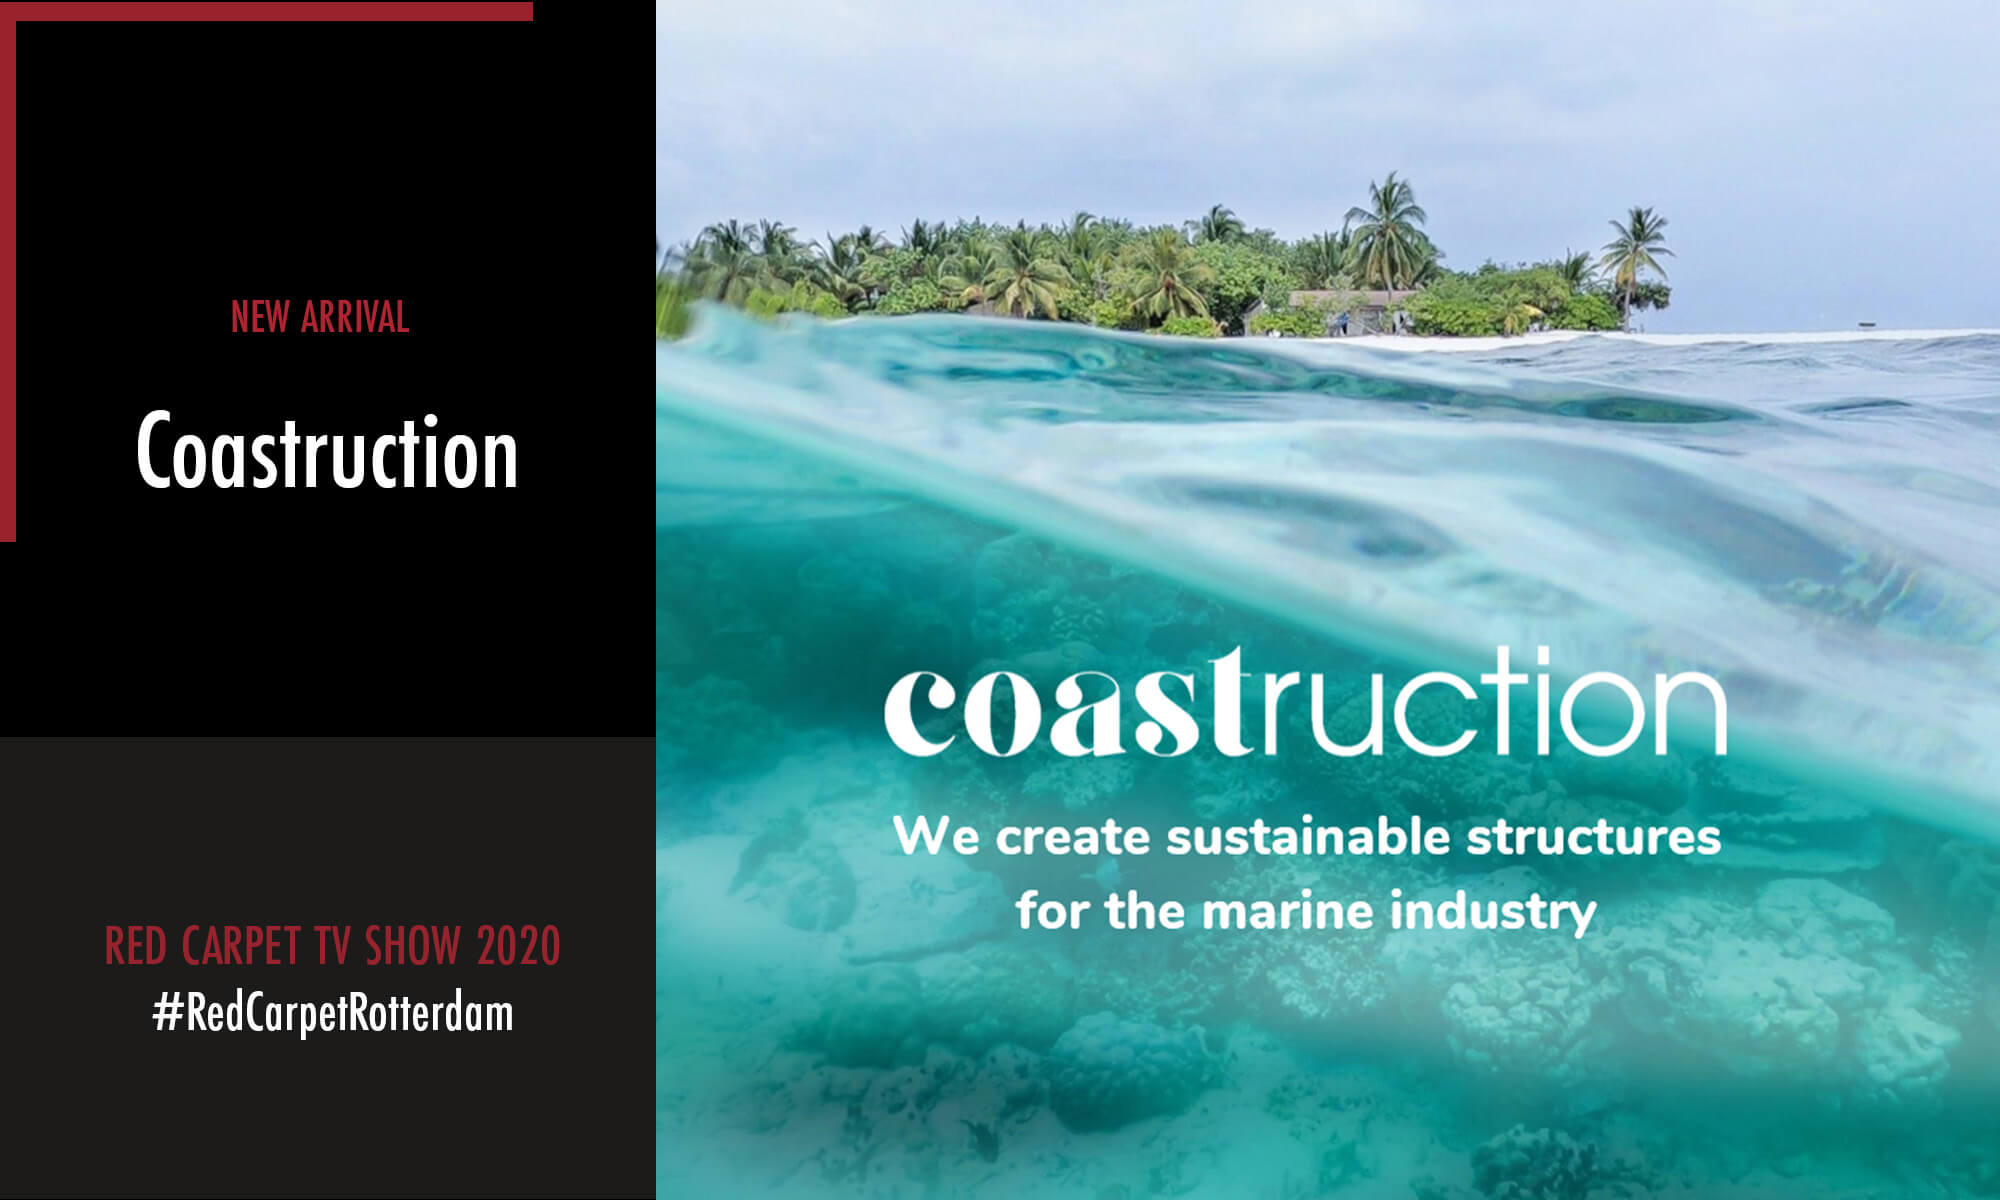 Coastruction is one of the new arrivals participating in the Red Carpet TV Show 2020